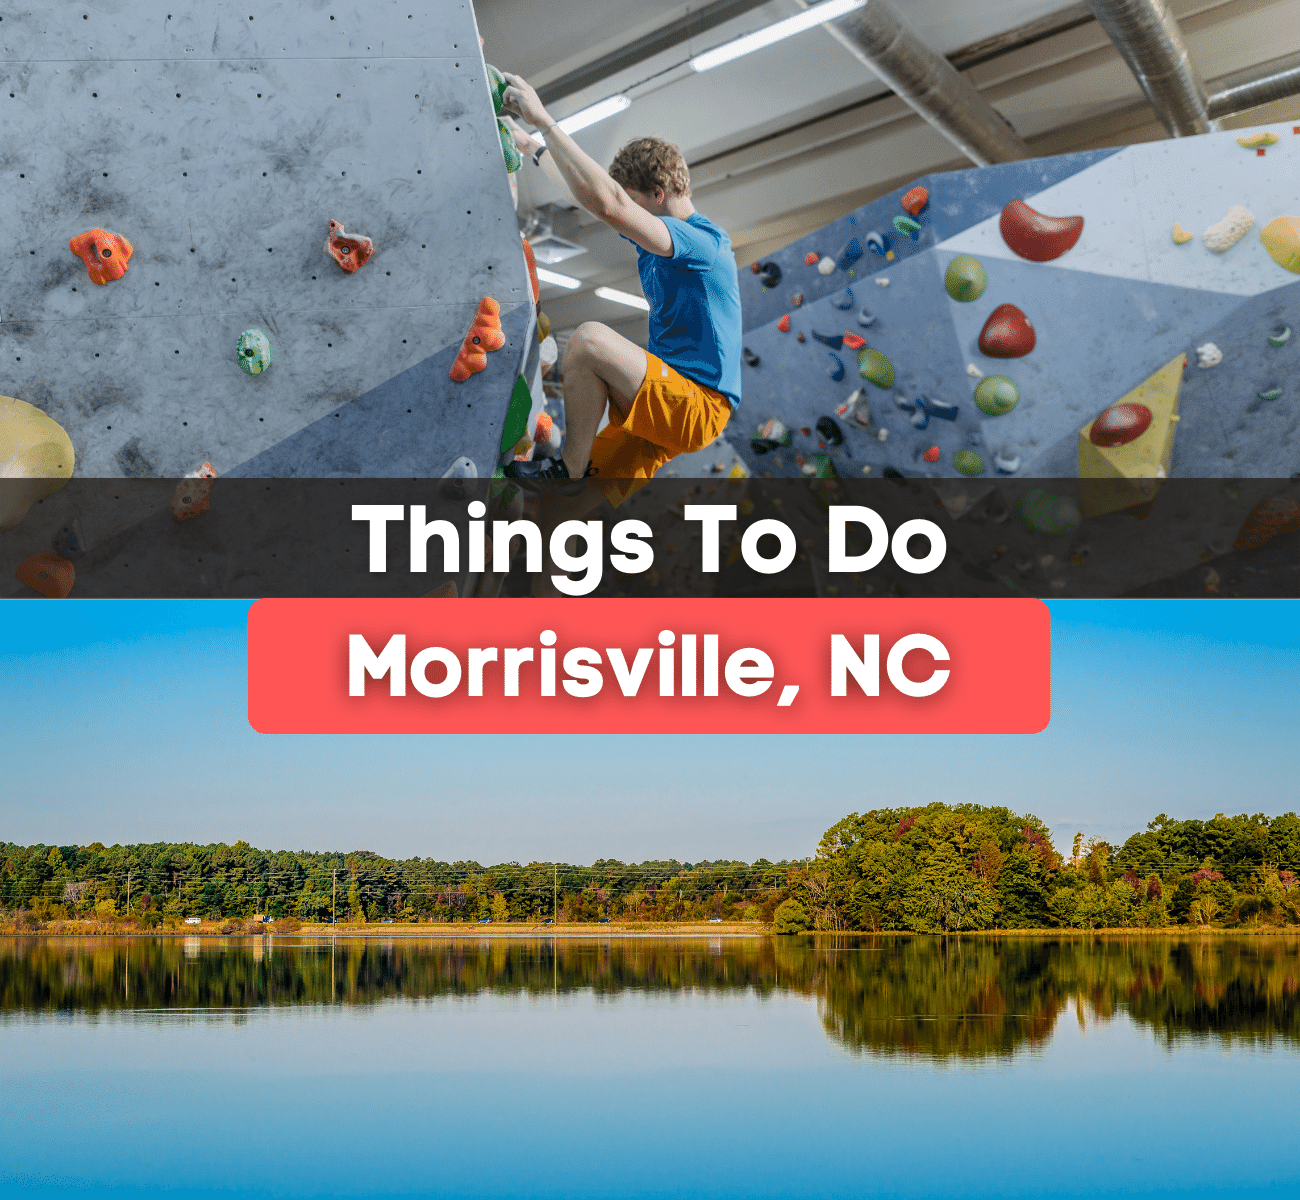 indoor rock climbing and Lake Crabtree in Morrisville, NC